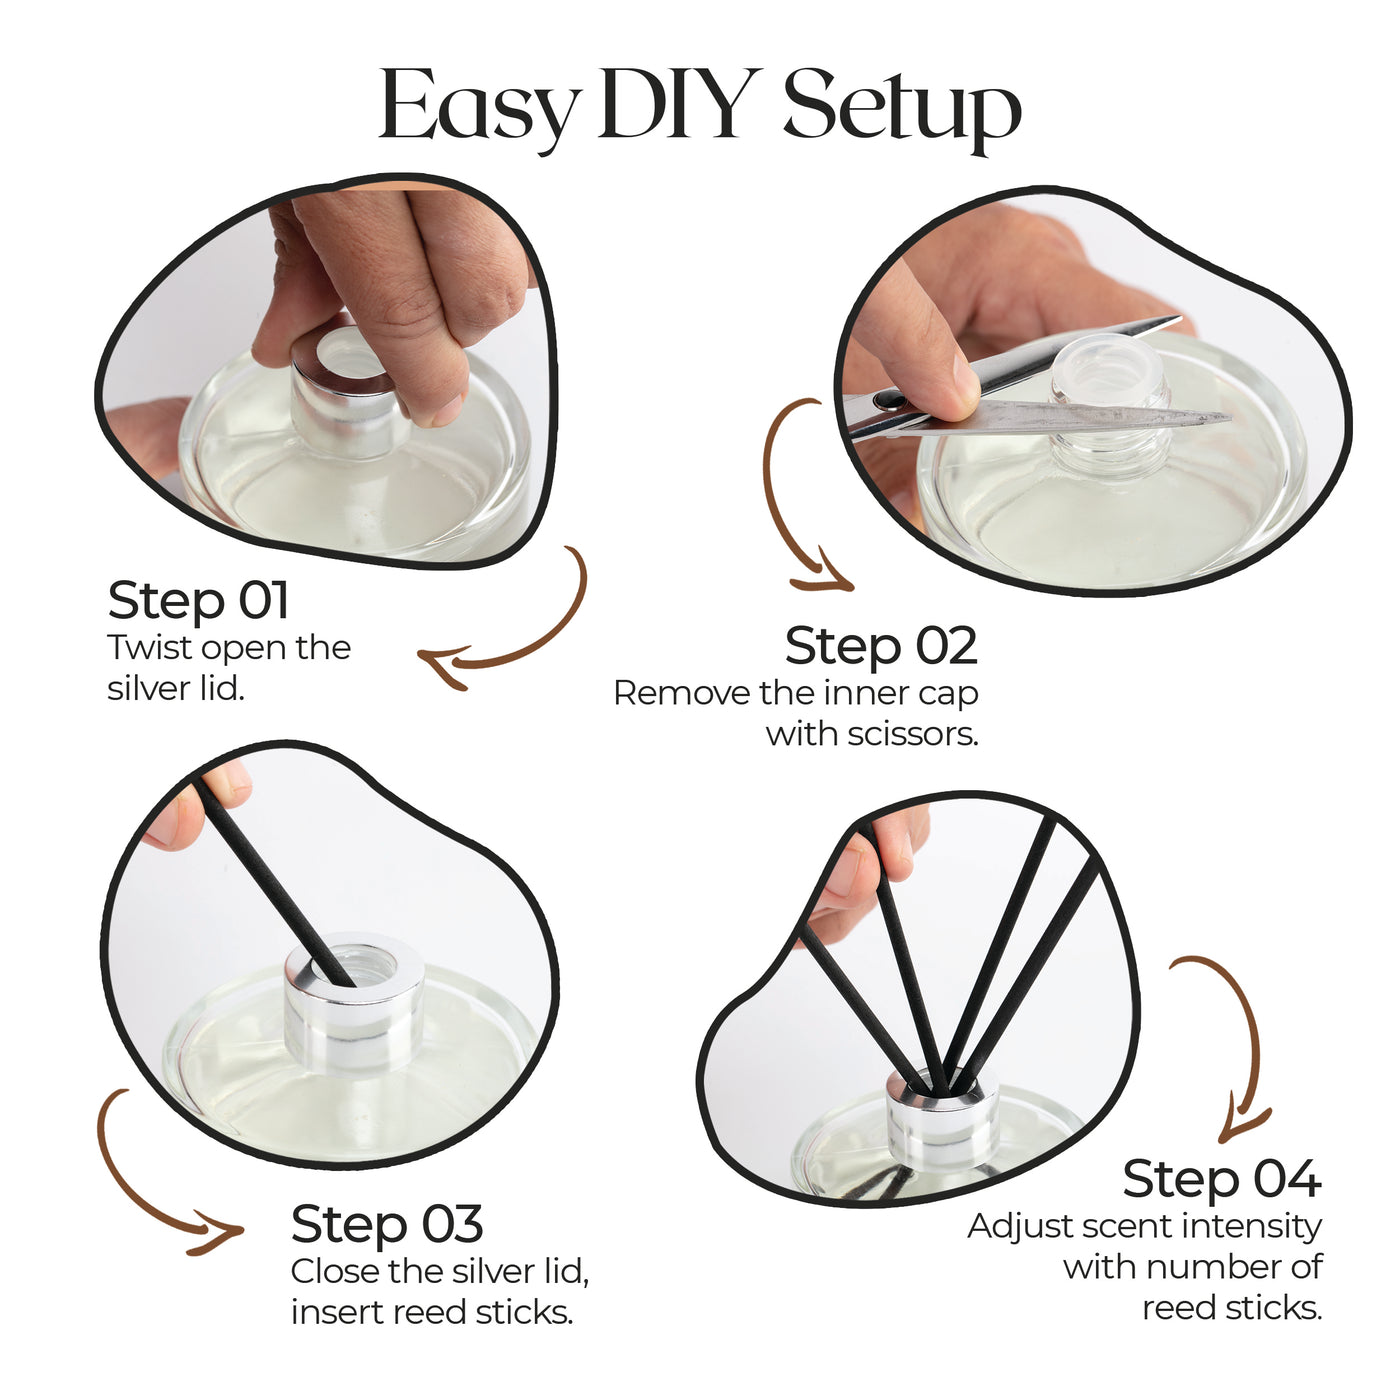 Step-by-step infographic on how to set up a Sweet Memoir reed diffuser, detailing opening the bottle, inserting the reeds, and adjusting for desired scent strength.